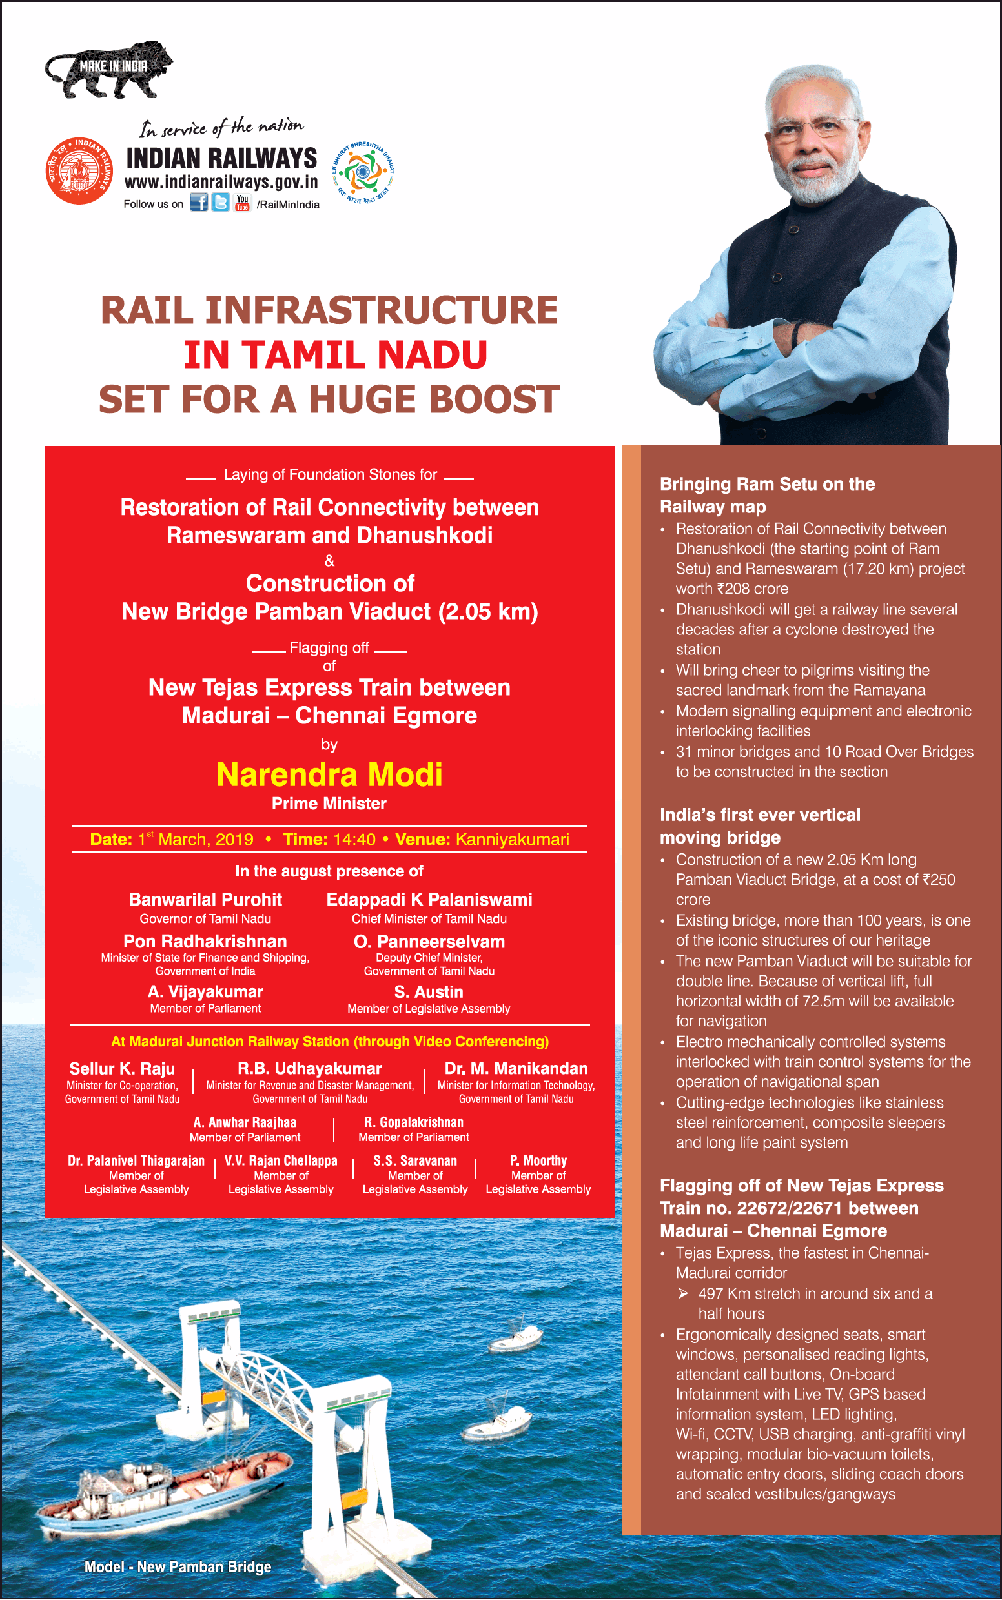 indian-railways-rail-infrastructure-in-tamil-nadu-set-for-a-huge-boost-ad-times-of-india-chennai-01-03-2019.png